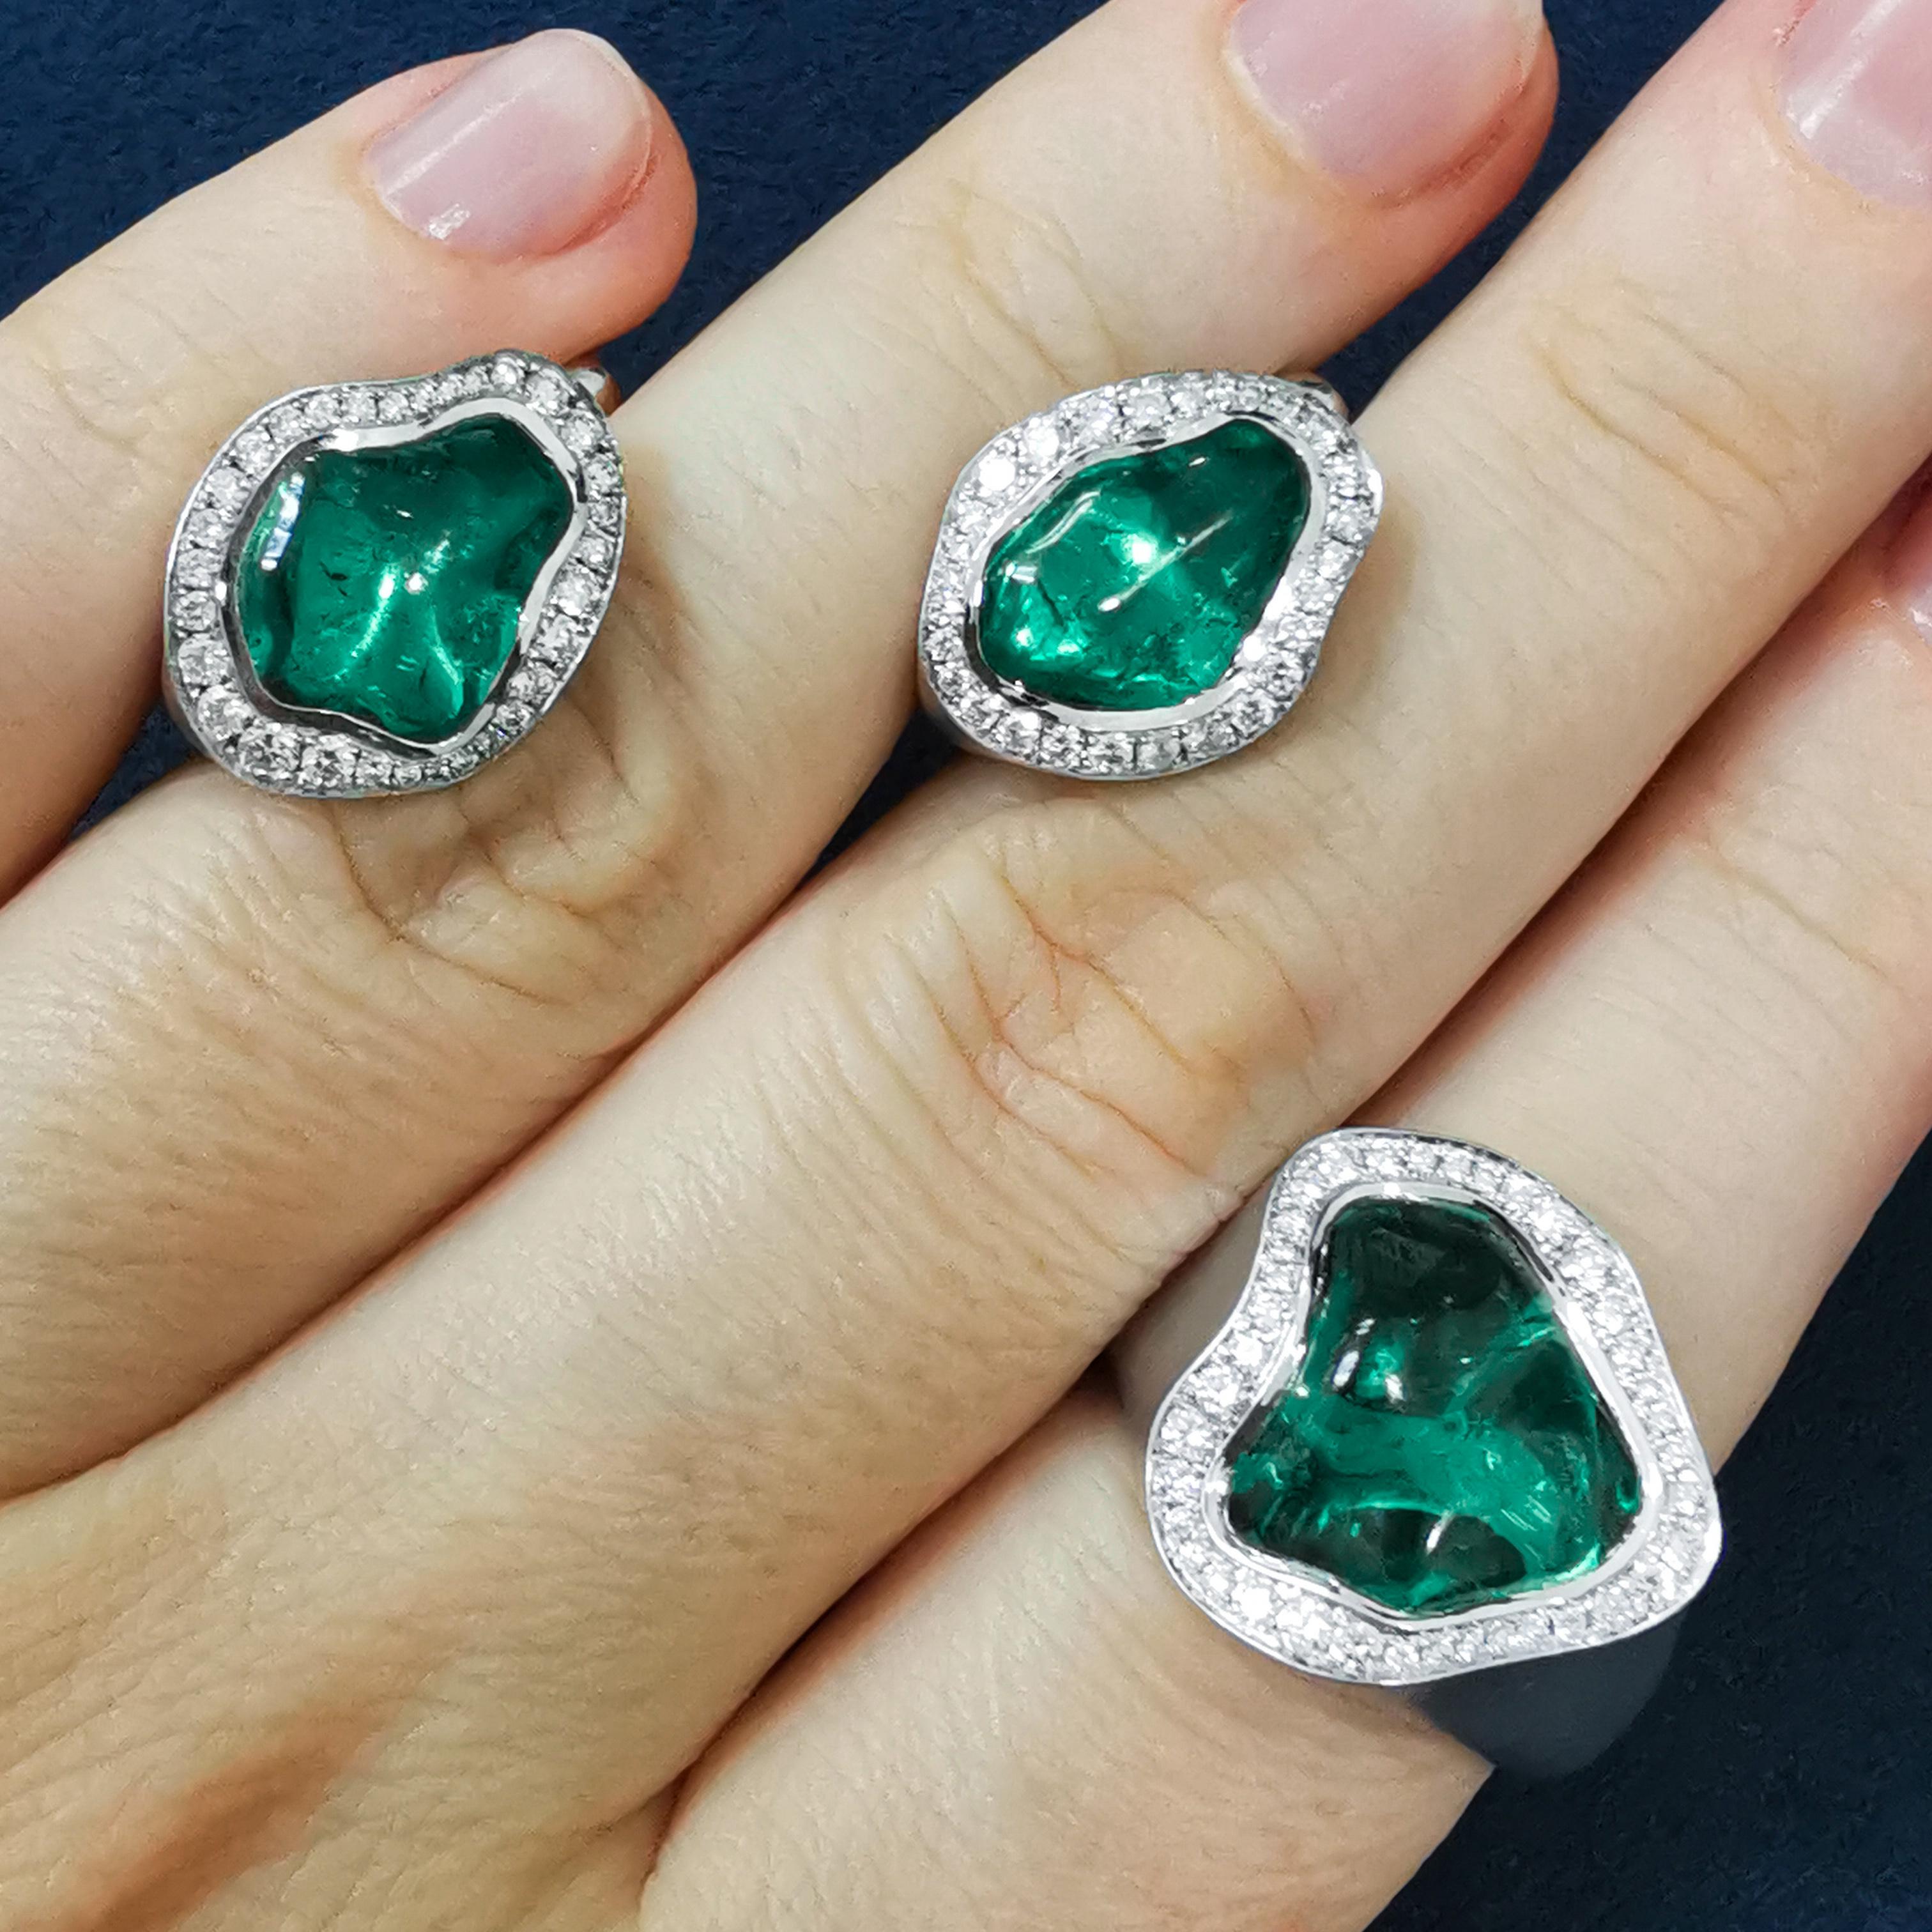 Green Tourmaline Diamonds 18 Karat White Matte Gold Spectrum Suite

Exquisite and stylish, this 18K White Gold, Green Tourmalines, Diamonds Suite from the Spectrum collection is sure to draw attention. A stunning baroque-shaped Green Tourmaline is